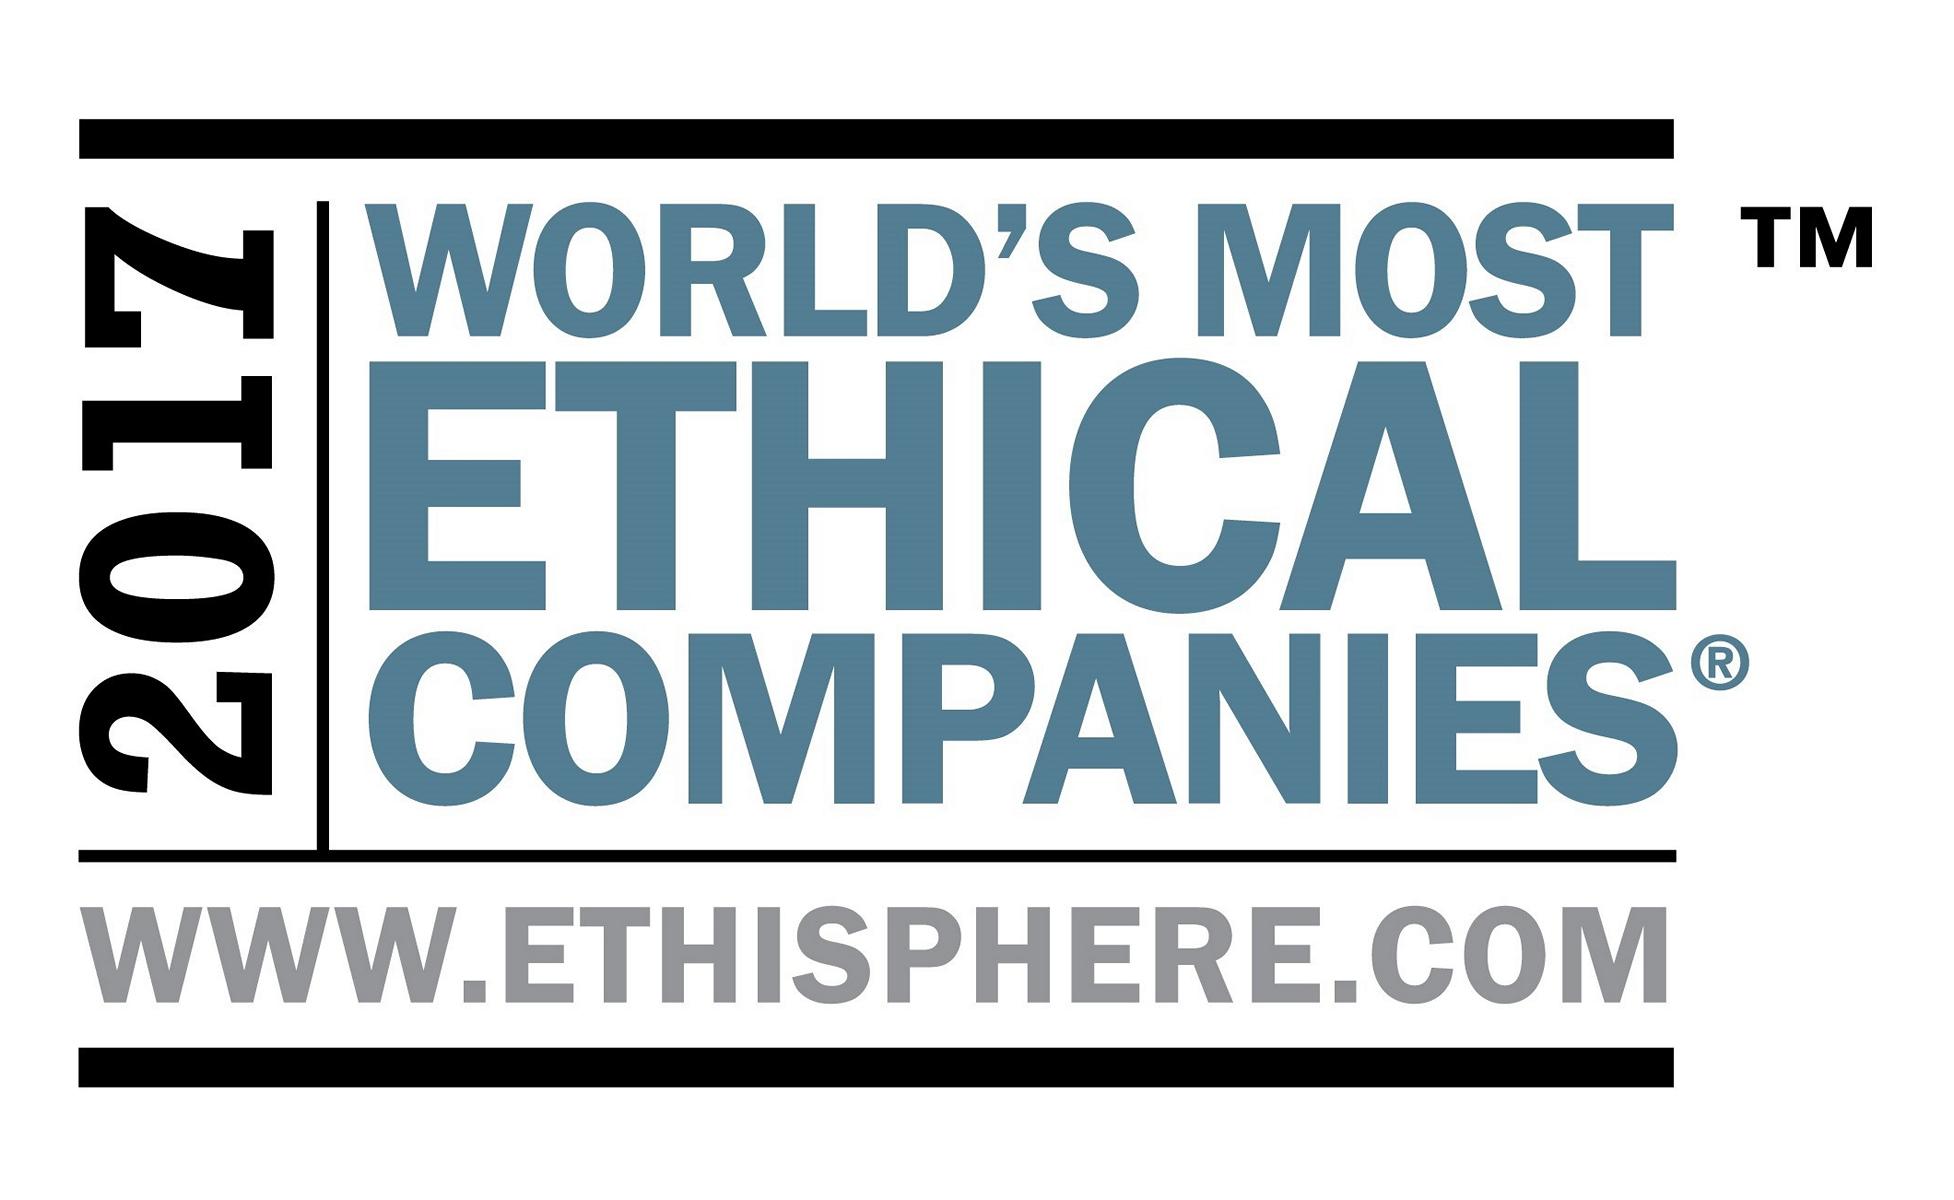 K1600 206679 2017 World s Most Ethical Companies logotype 